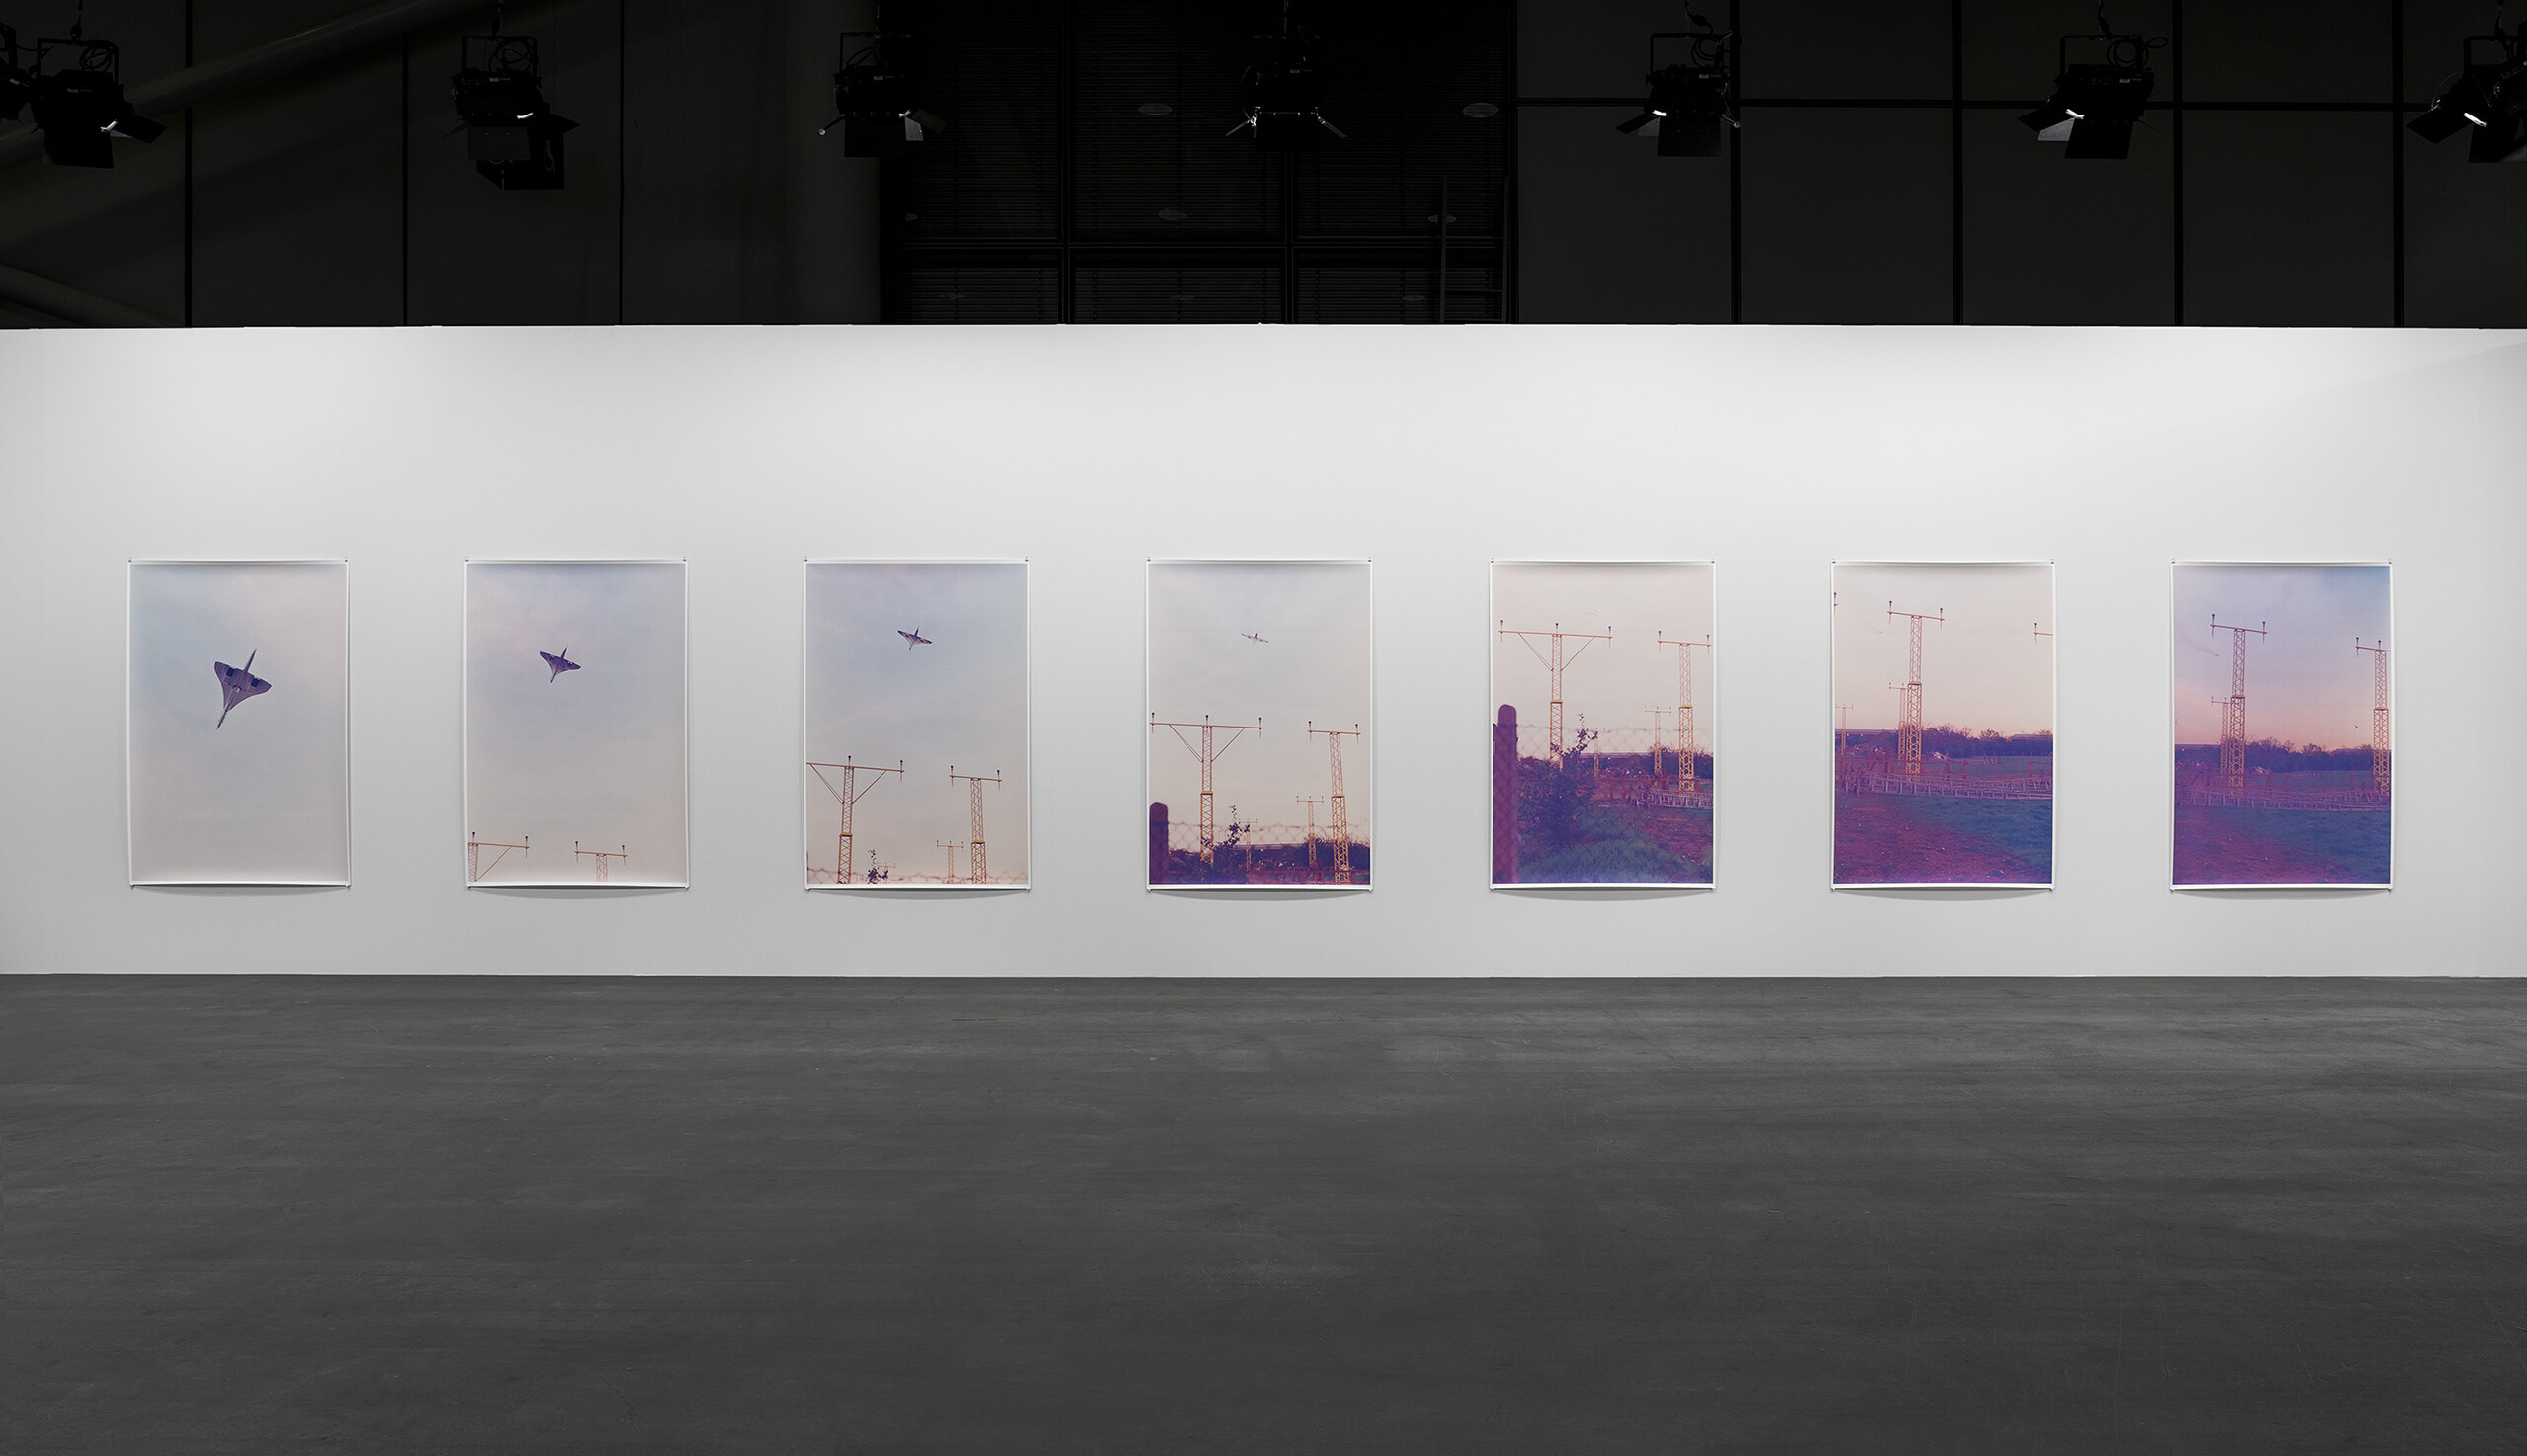 A set of seven inkjet prints on paper by Wolfgang Tillmans, titled Concorde L449-19, 21, 22, 23, 25, 27, 28, dated 1997.